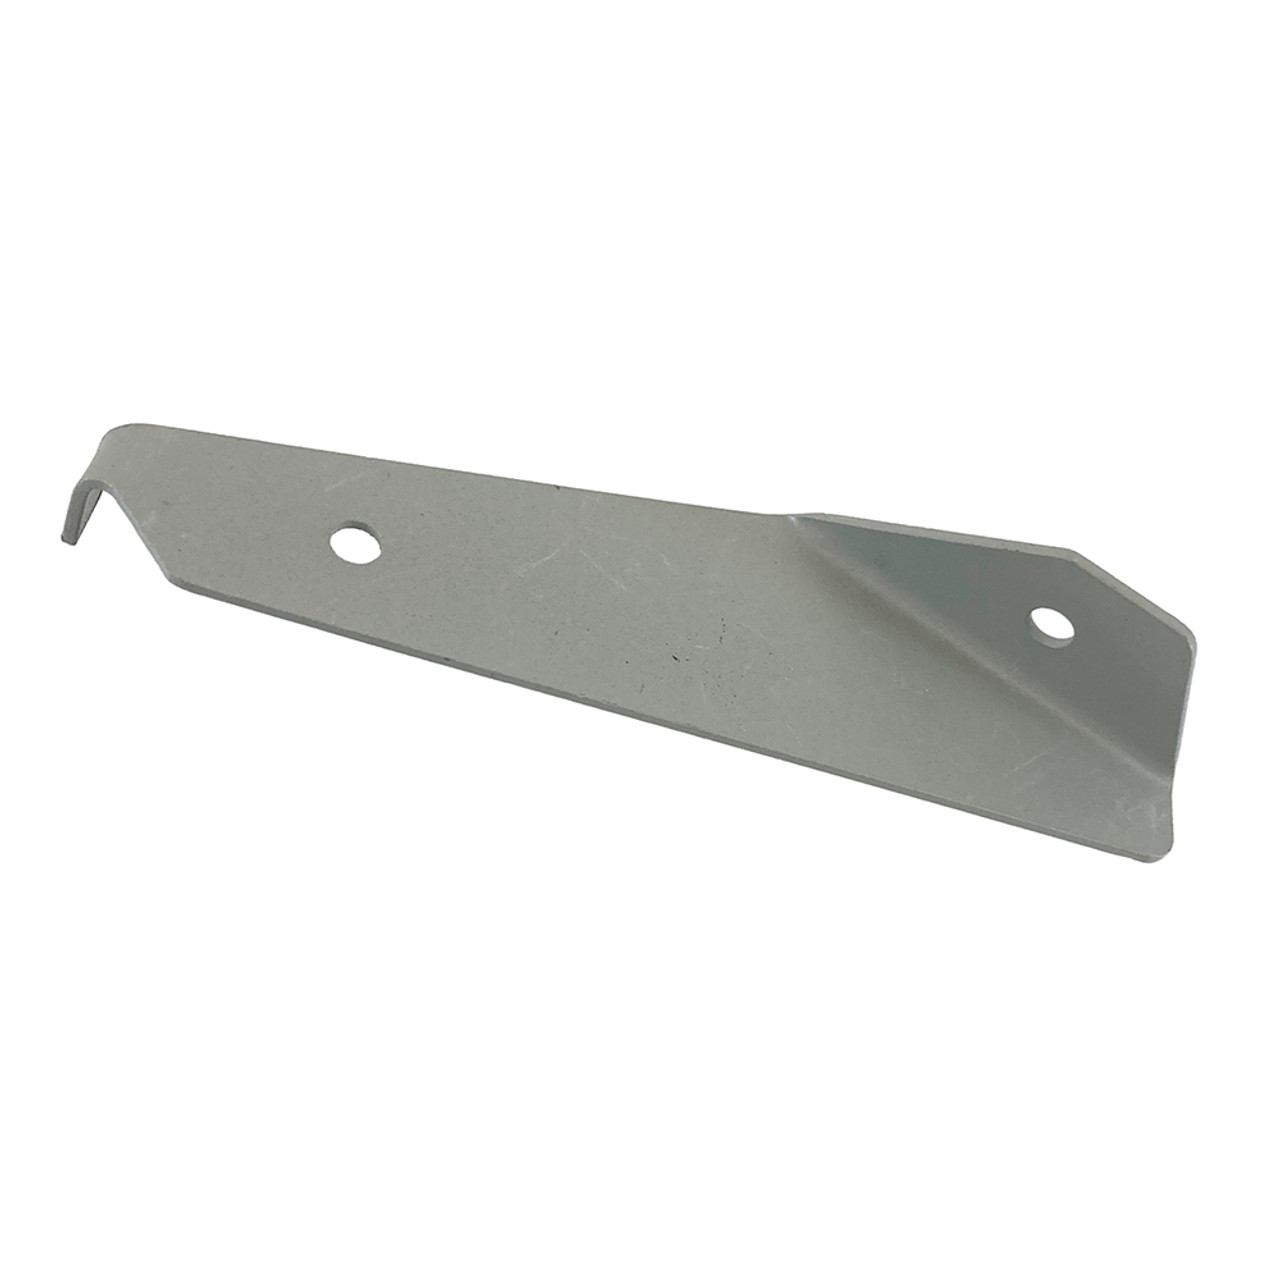 U14621-001   UNIVAIR OUTBOARD AILERON PULLEY BRACKET - RIGHT - FITS PIPER